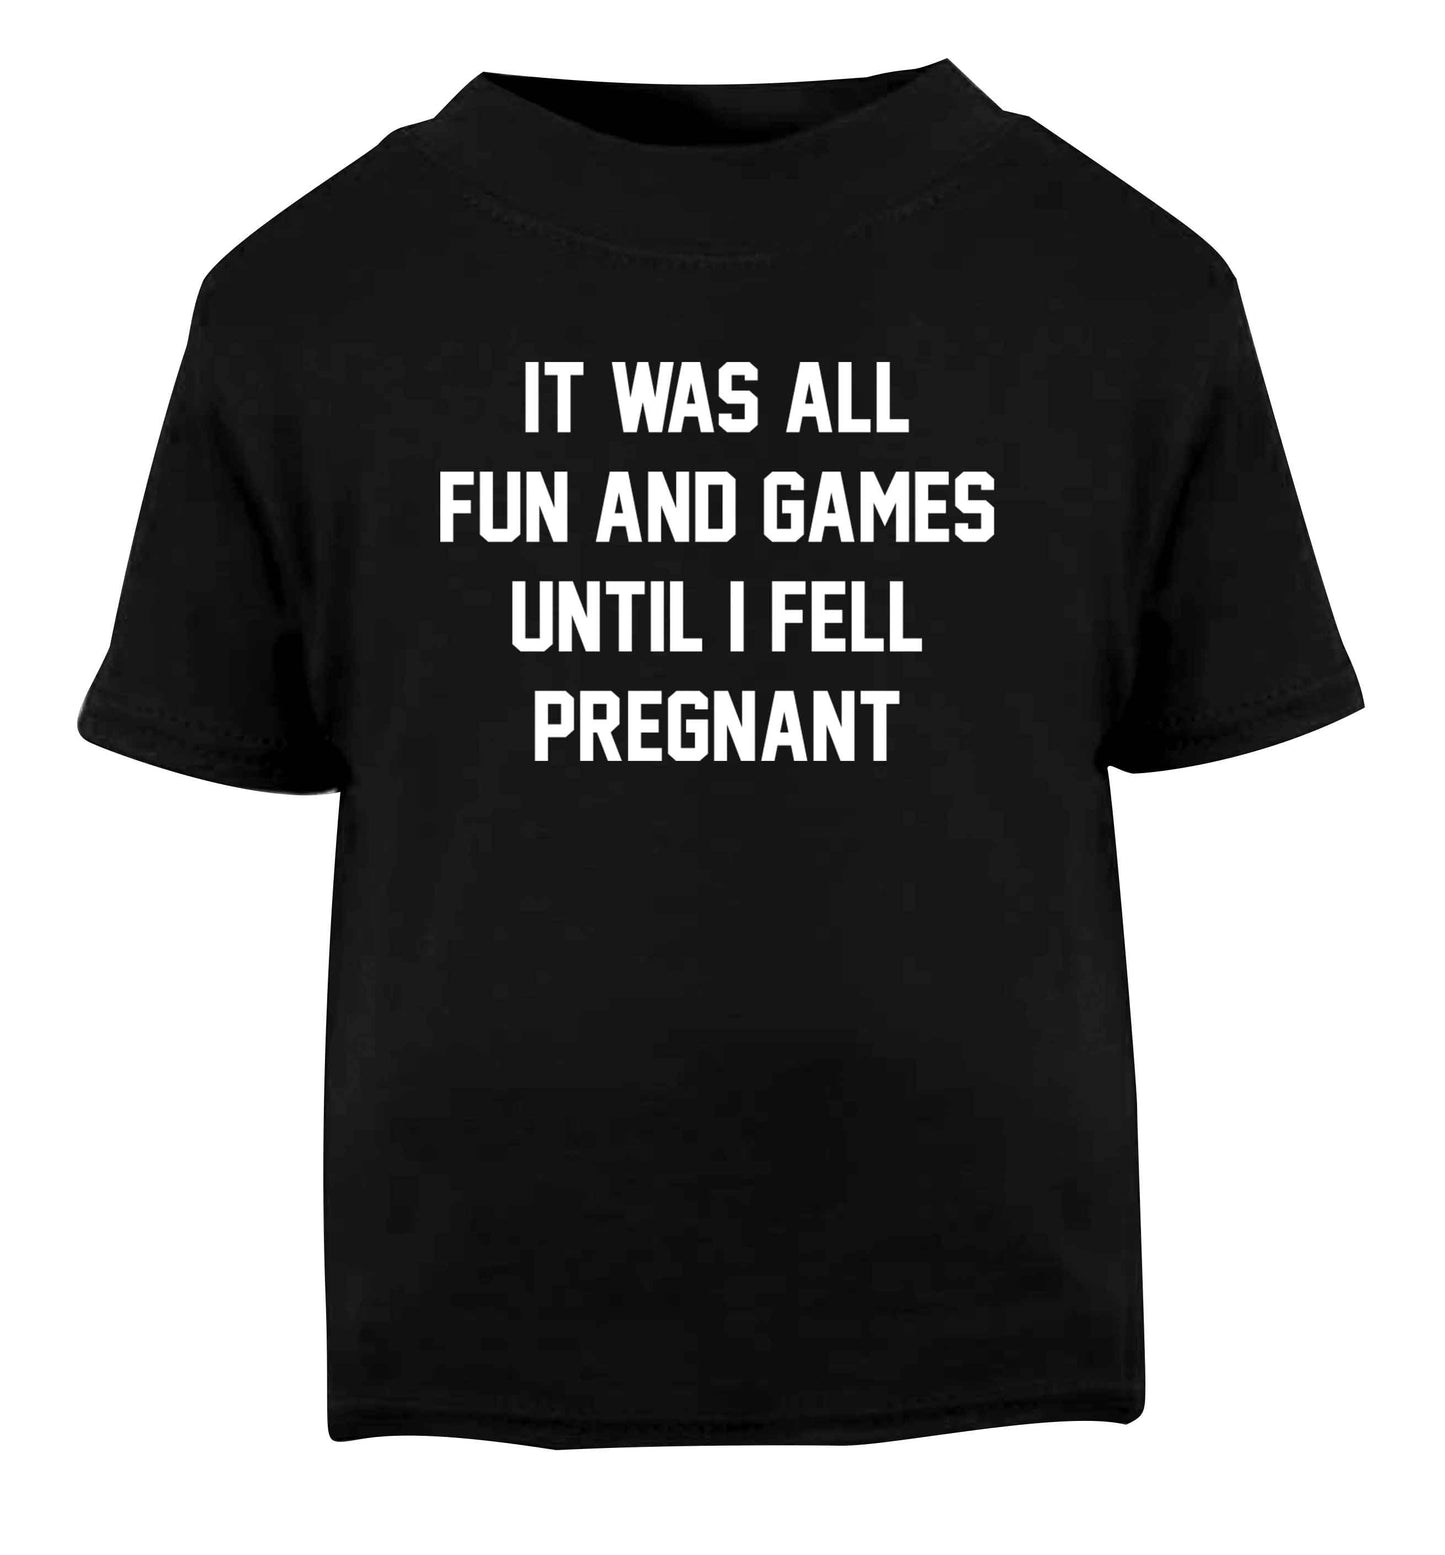 It was all fun and games until I fell pregnant kicks Black Baby Toddler Tshirt 2 years